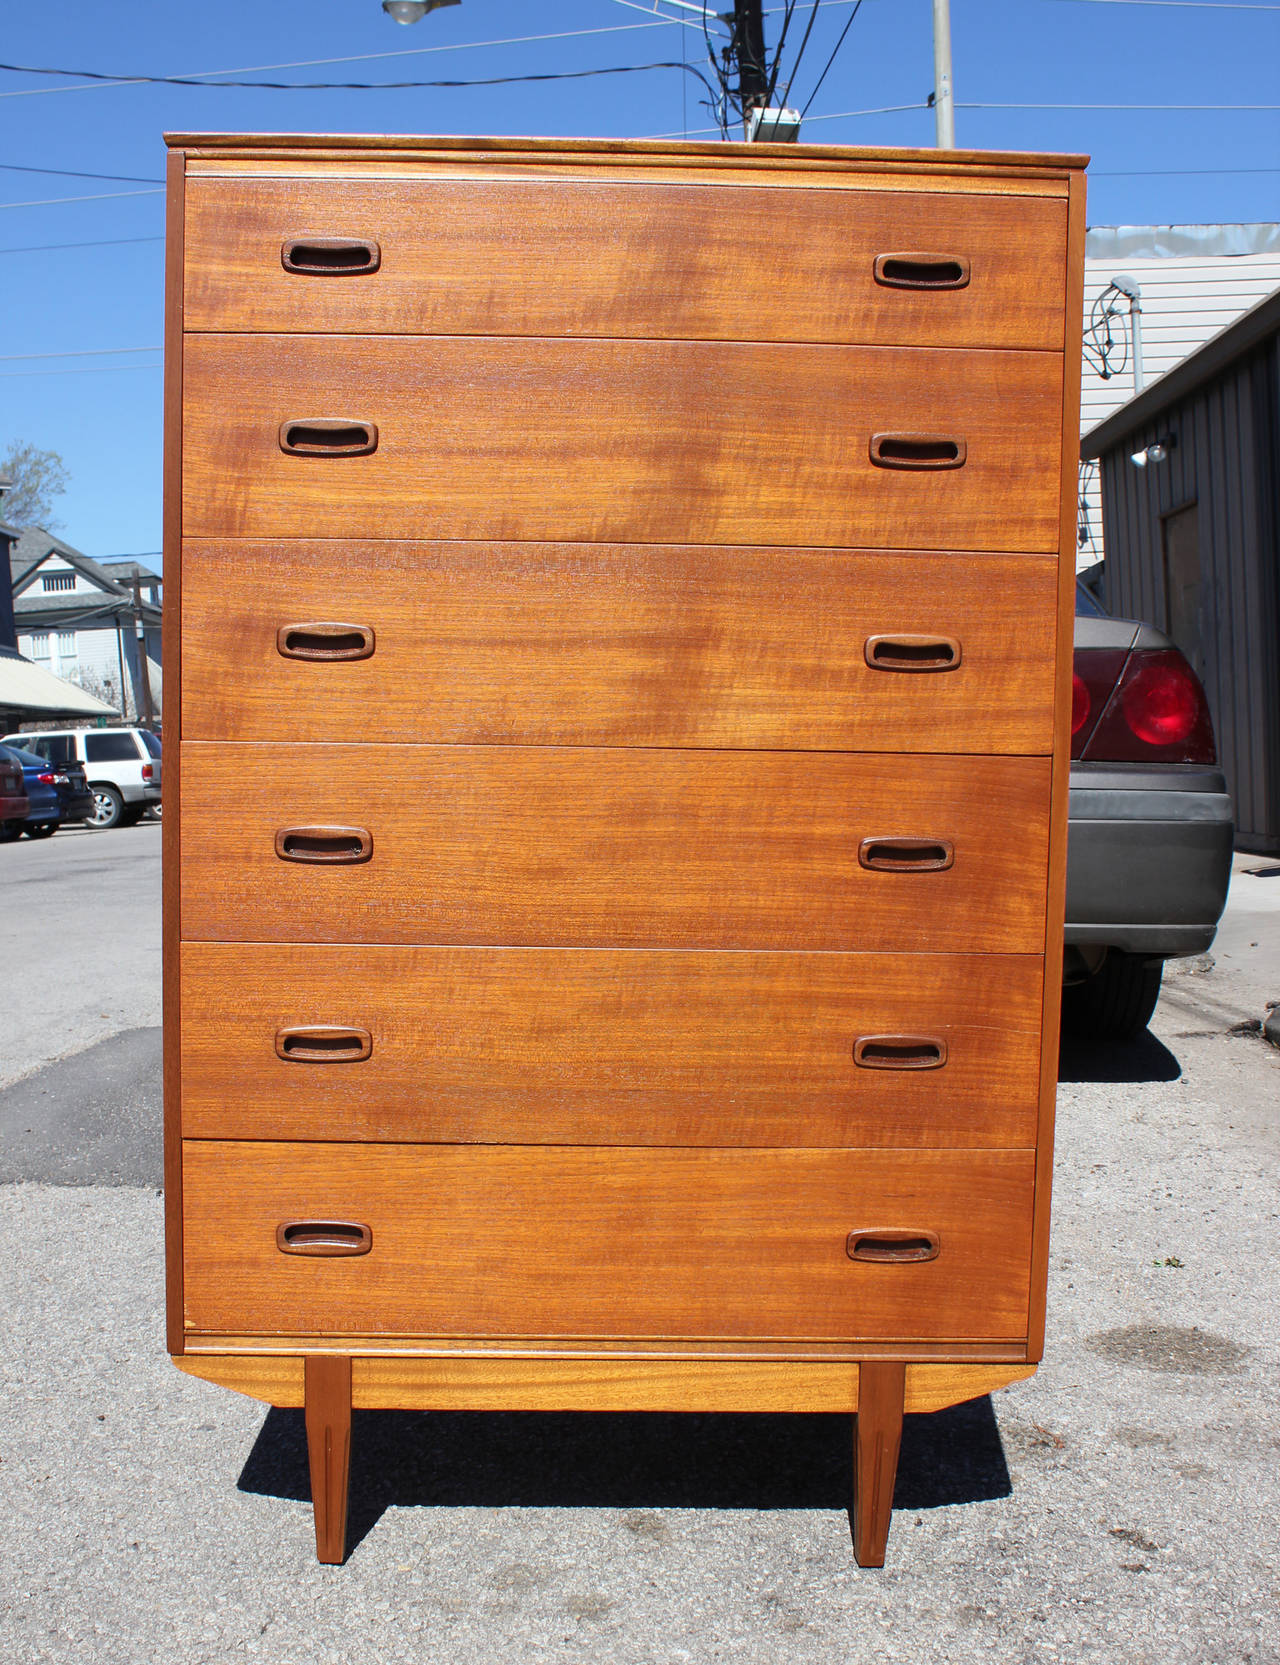 Great Danish Teak chest with 6 drawers. Chest has a great flamed grain to it and is in excellent vintage condition.